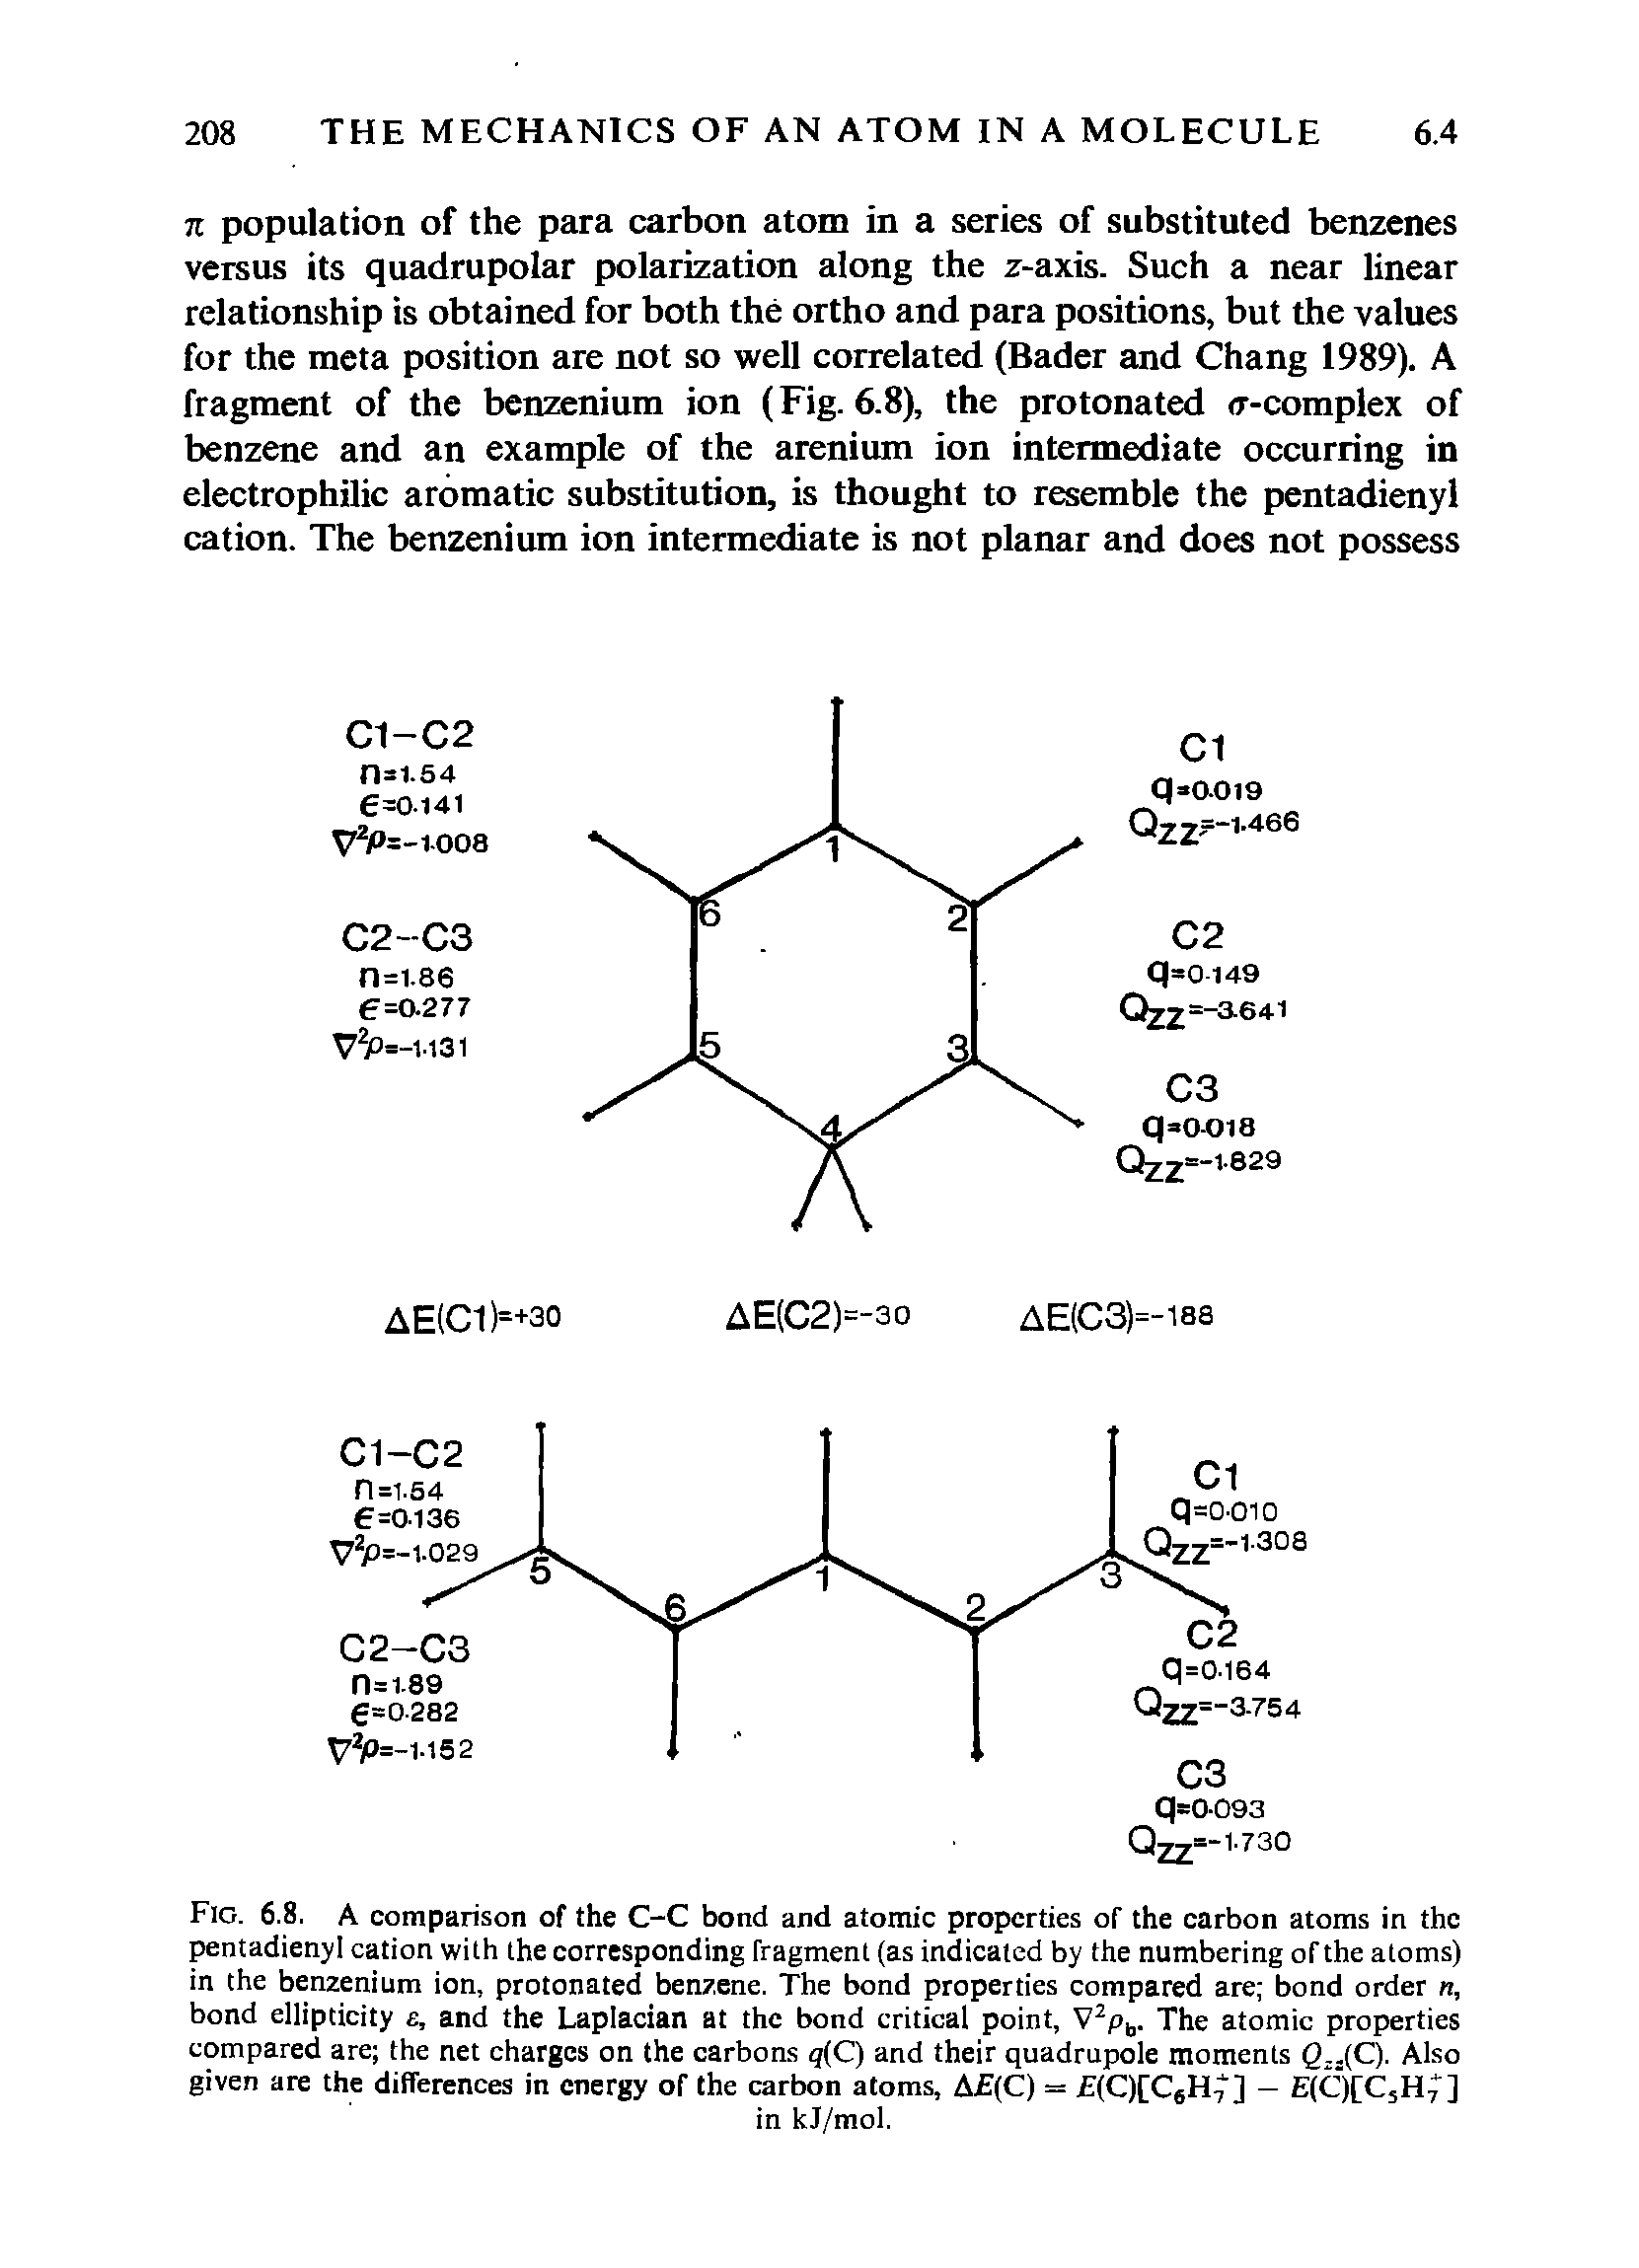 Fig. 6.8. A comparison of the C-C bond and atomic properties of the carbon atoms in the pentadienyl cation with the corresponding fragment (as indicated by the numbering of the atoms) in the benzenium ion, protonated benzene. The bond properties compared are bond order n, bond ellipticity e, and the Laplacian at the bond critical point, The atomic properties compared are the net charges on the carbons g(C) and their quadrupole moments Q,.(C). Also given are the differences in energy of the carbon atoms, A (C) = FfClCCeH. ] - ElQCCjH ...